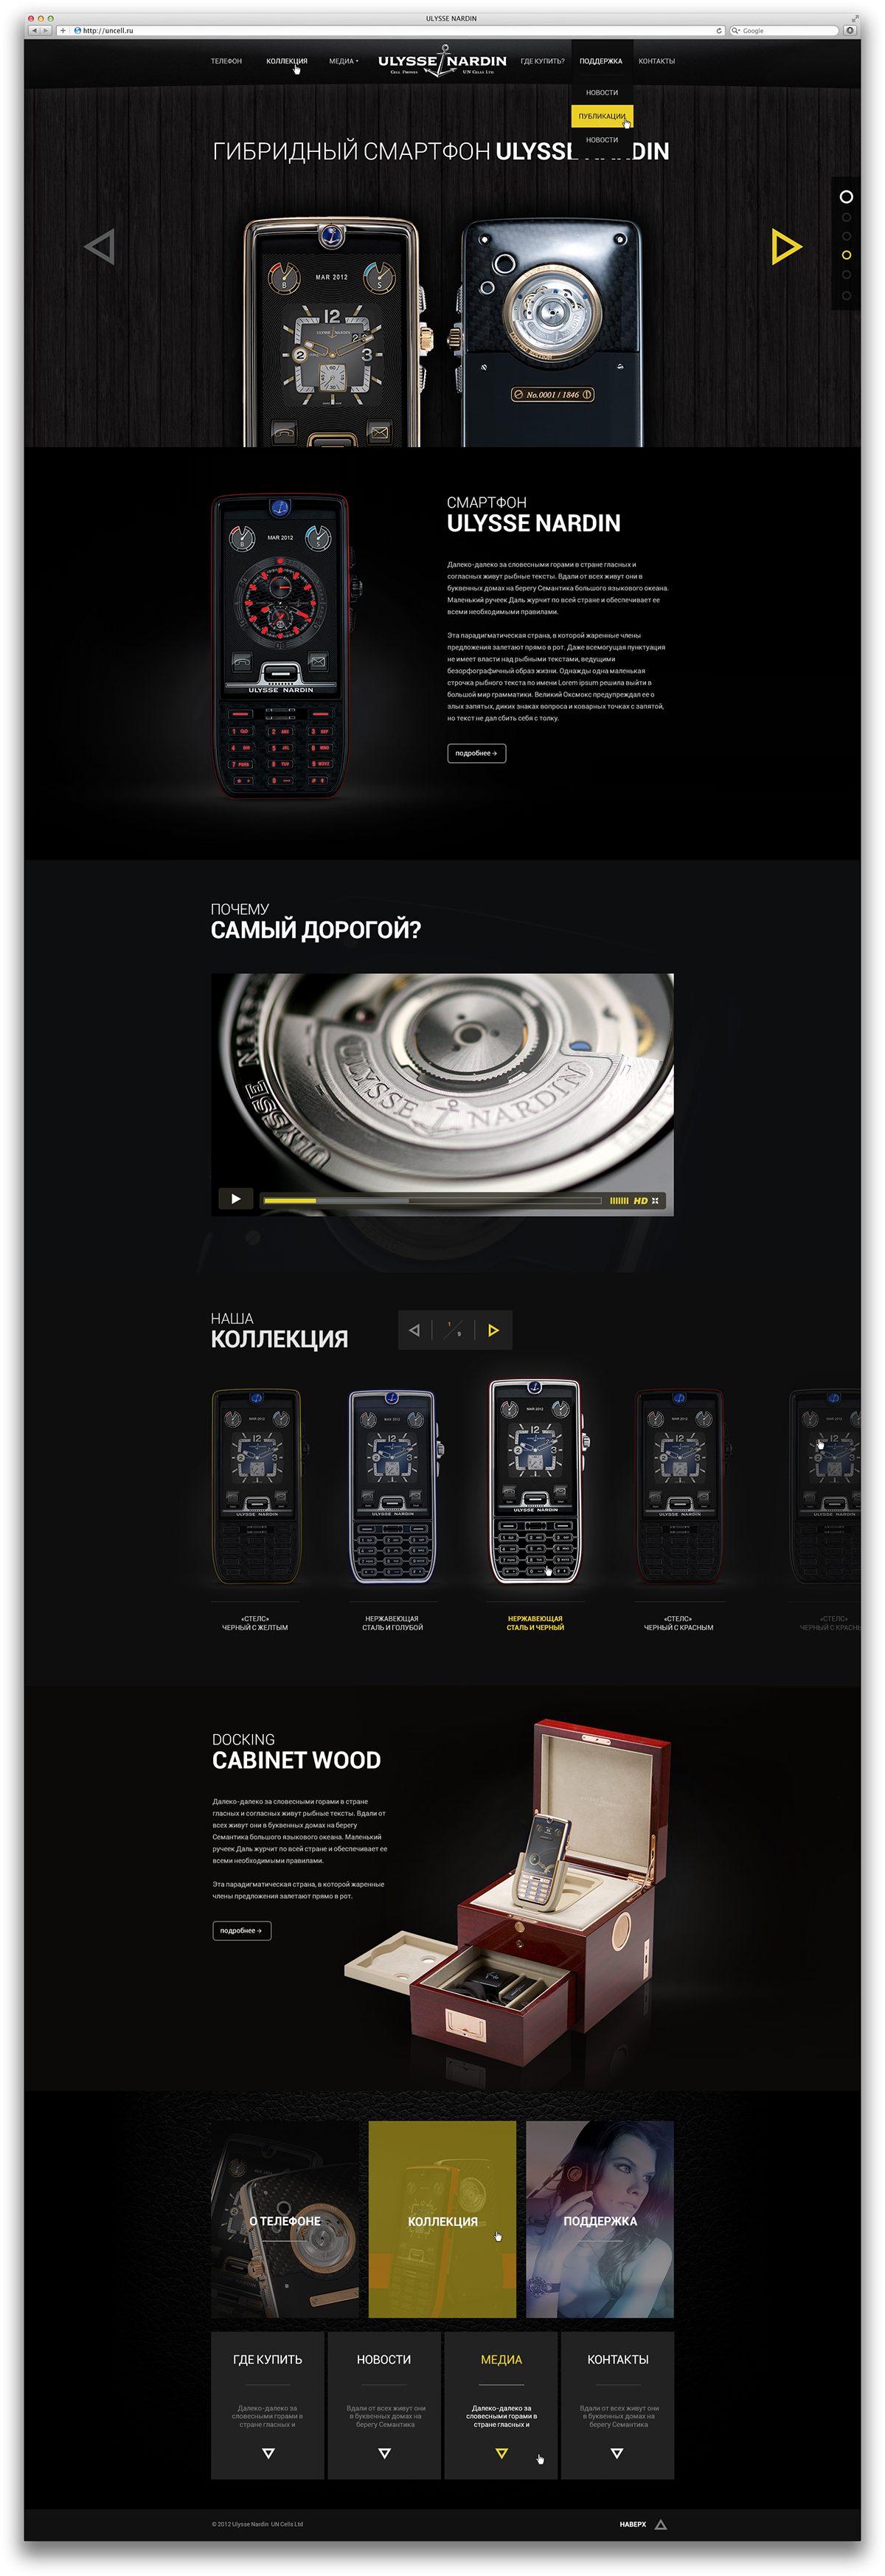 Ulysse Nardin smartphones phones uncell expensive phones exclusive phones e-commerce web shop uncell.ru synergize Website basovdesign Russia